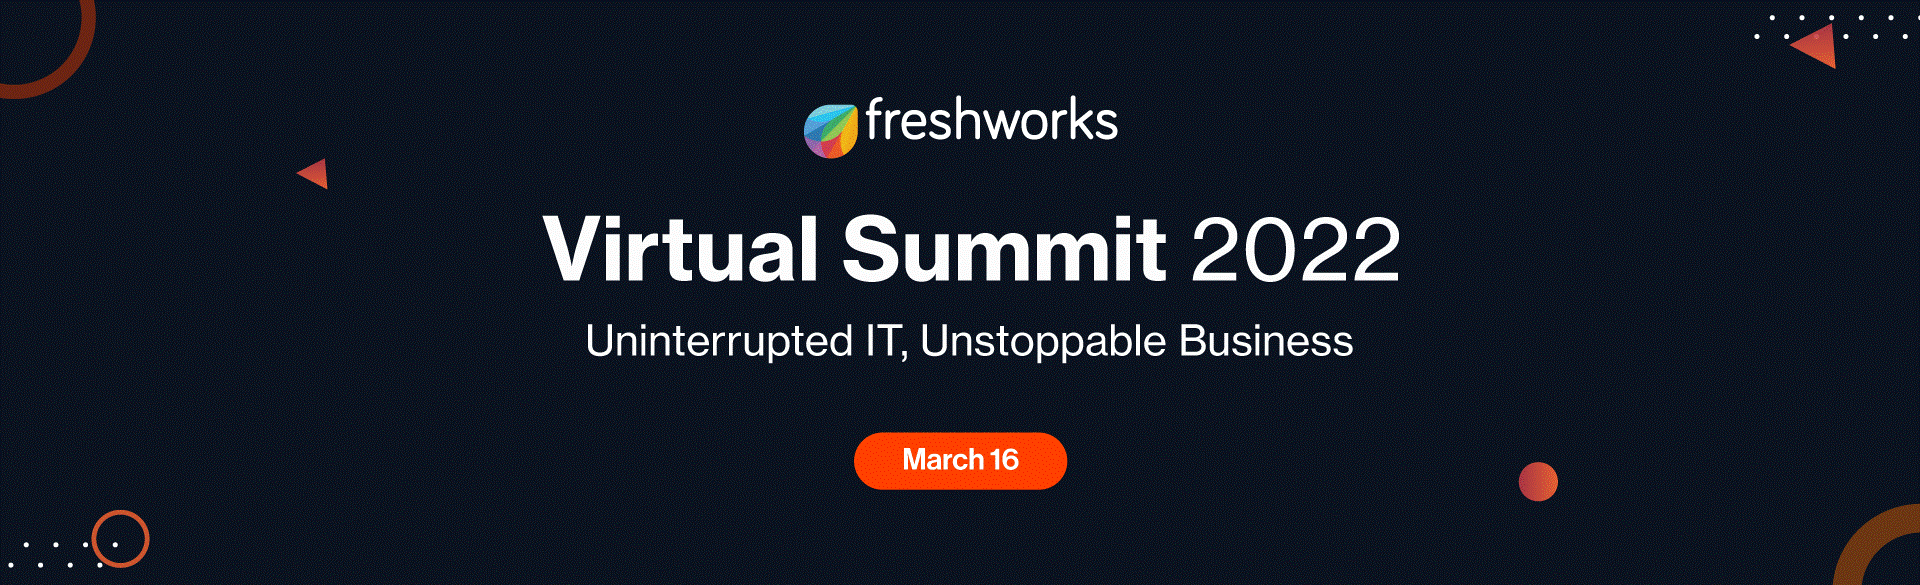 Freshworks: Be Unstoppable - Virtual Summit 